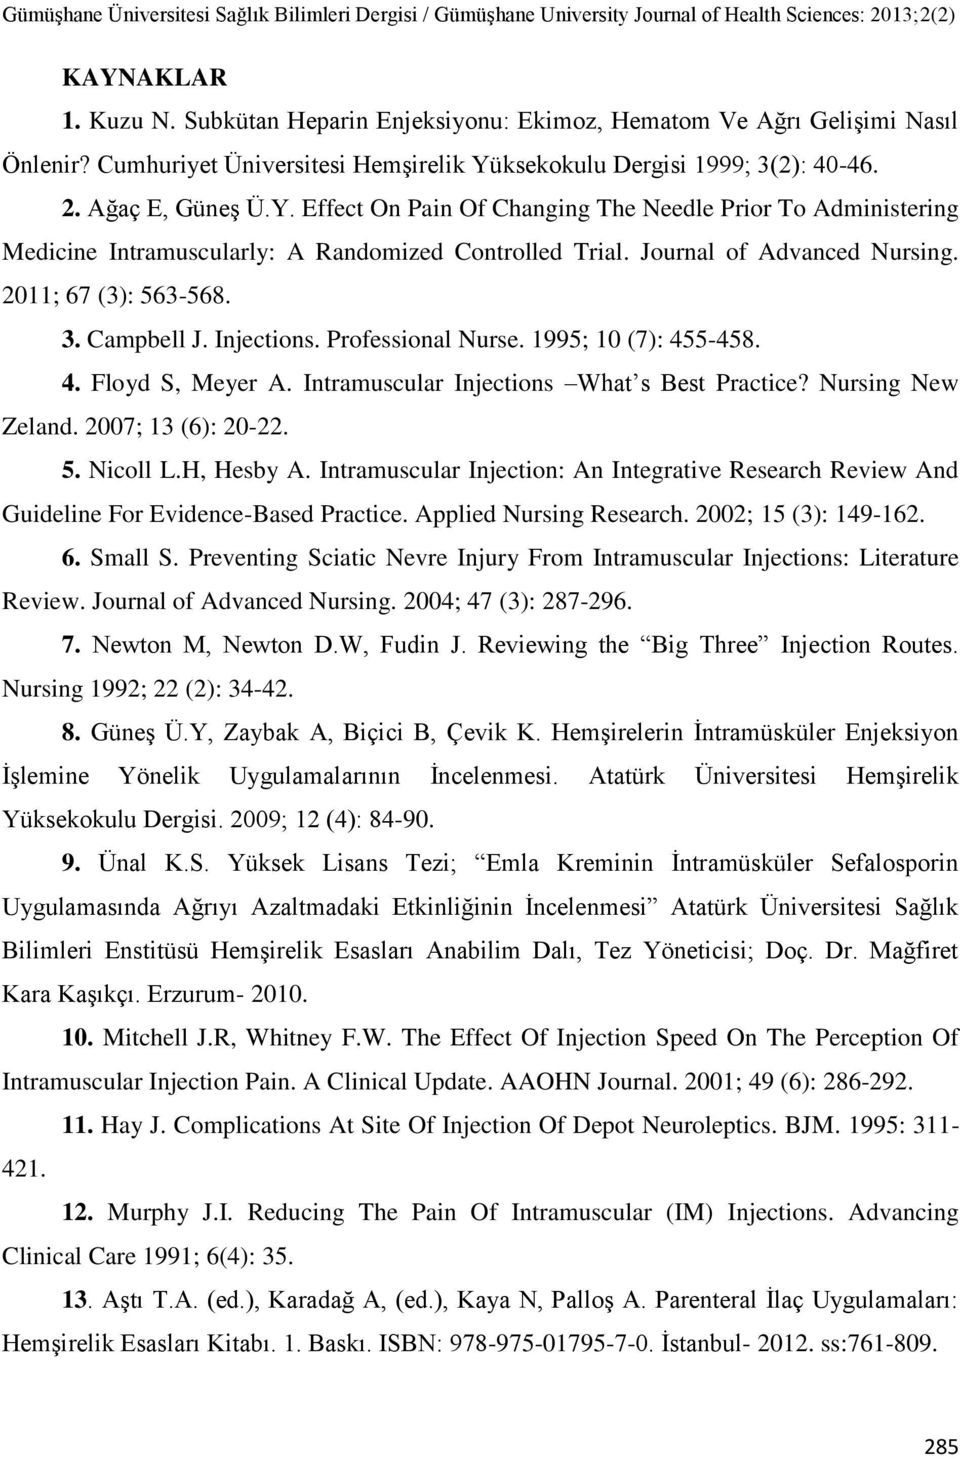 Nursing New Zeland. 2007; 13 (6): 20-22. 5. Nicoll L.H, Hesby A. Intramuscular Injection: An Integrative Research Review And Guideline For Evidence-Based Practice. Applied Nursing Research.